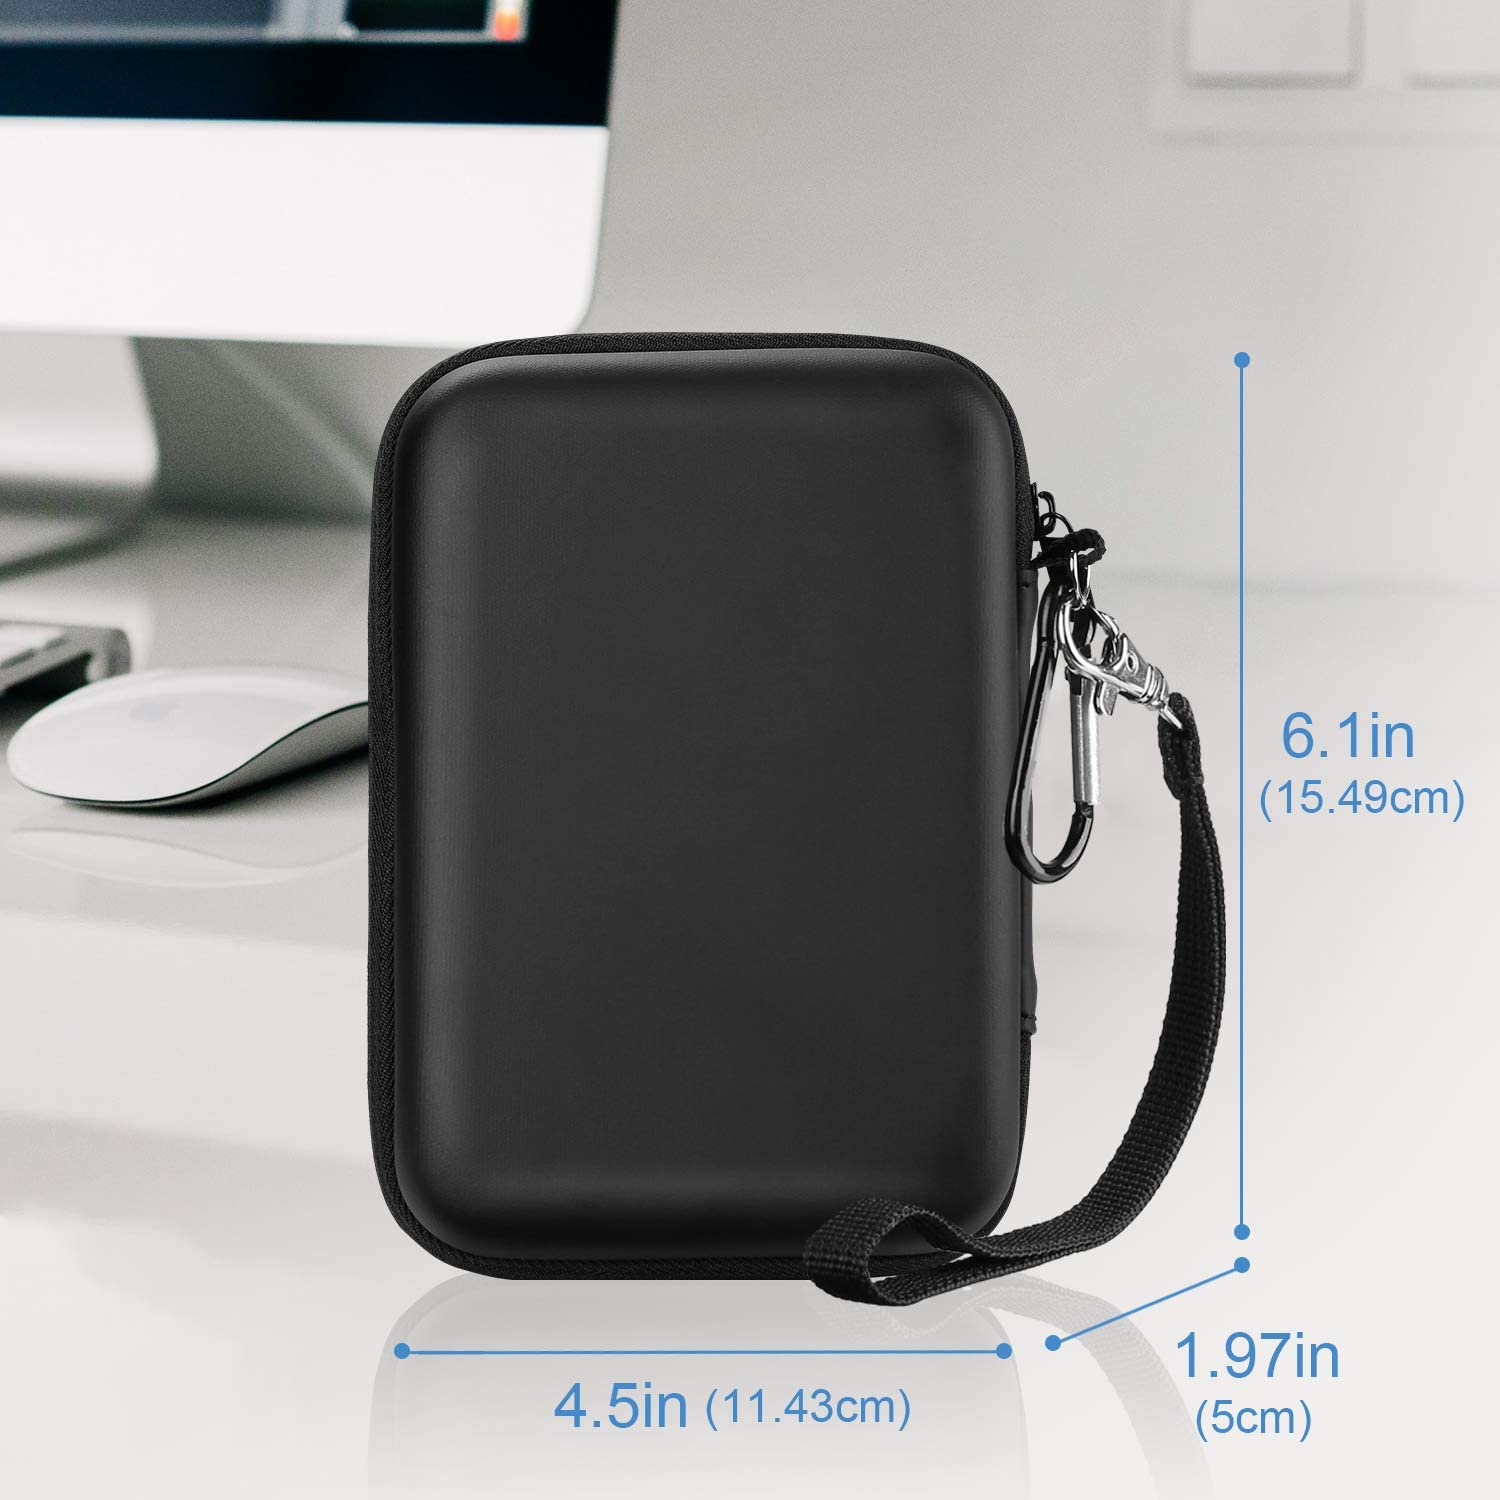  ProCase Hard Travel Electronic Organizer Case for MacBook Power  Adapter Chargers Cables Power Bank Apple Magic Mouse Apple Pencil USB Flash  Disk SD Card Small Portable Accessories Bag -L, Black 